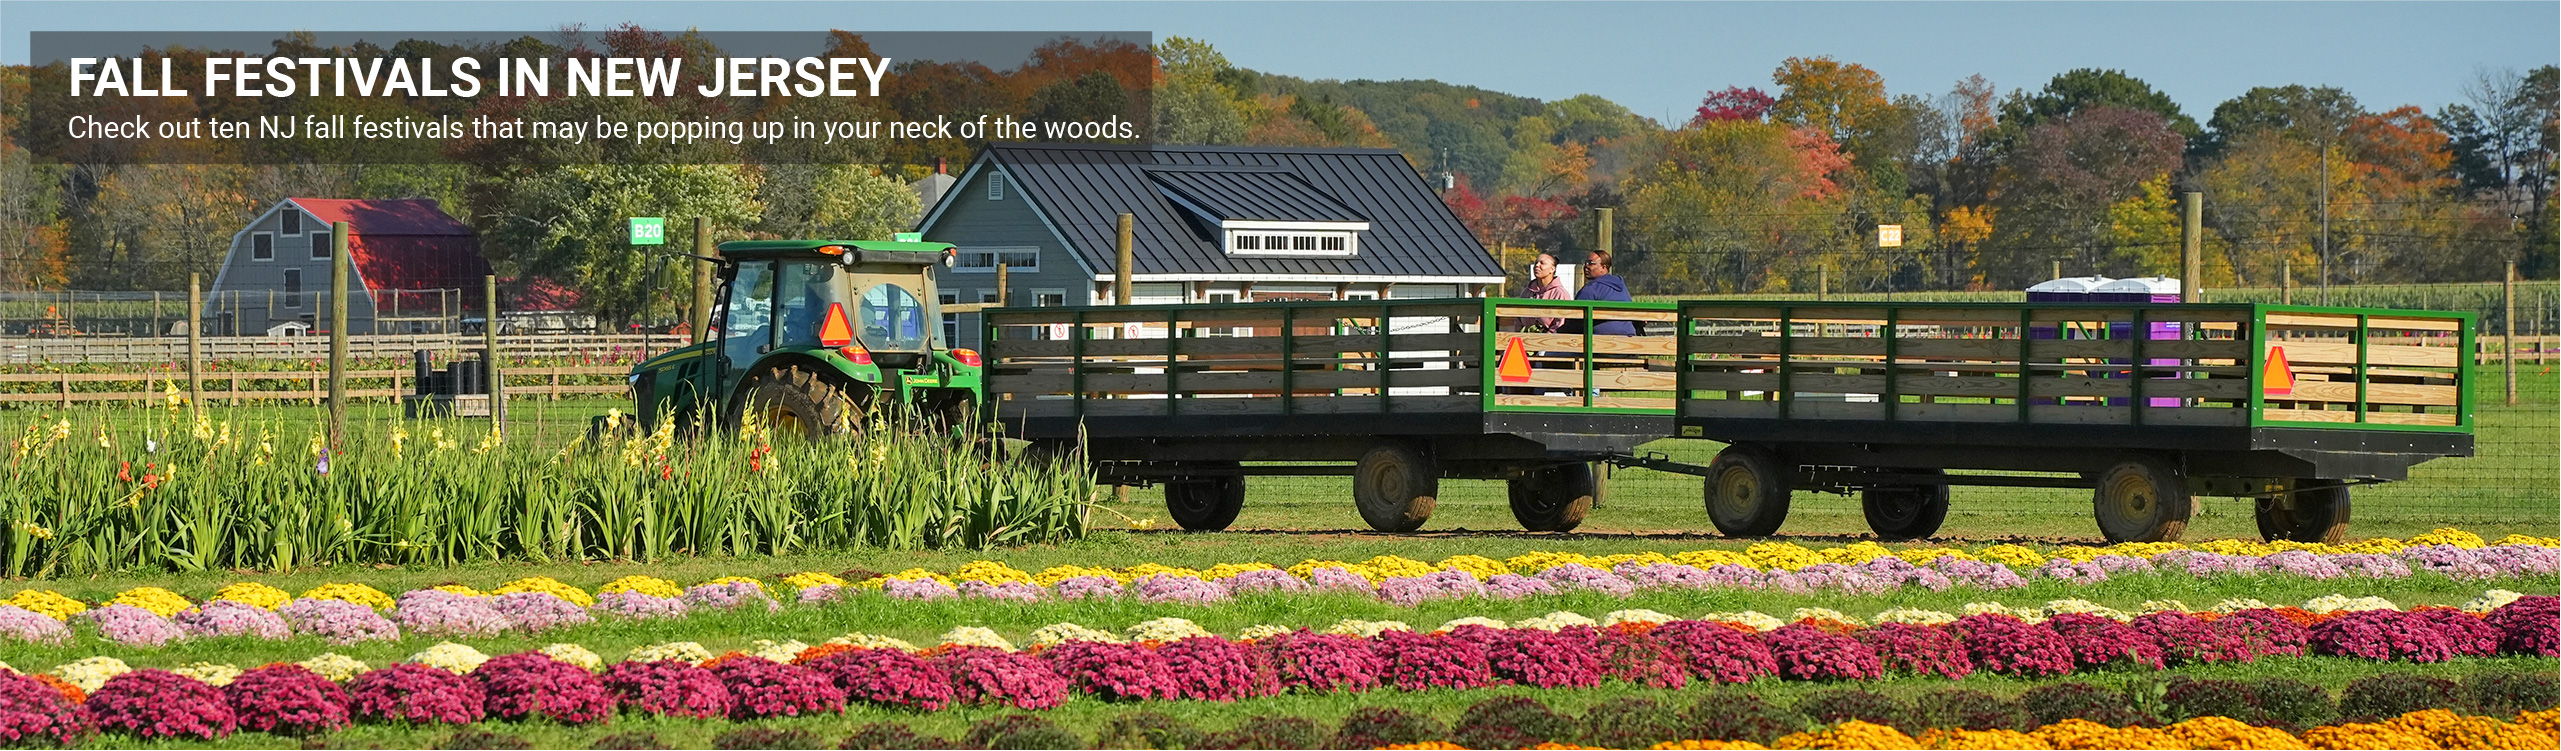 Image showing a farm in the fall with flowers for picking and a tractor pulling two people. Text reads FALL FESTIVALS IN NEW JERSEY Check out ten NJ fall festivals that may be popping up in your neck of the woods.